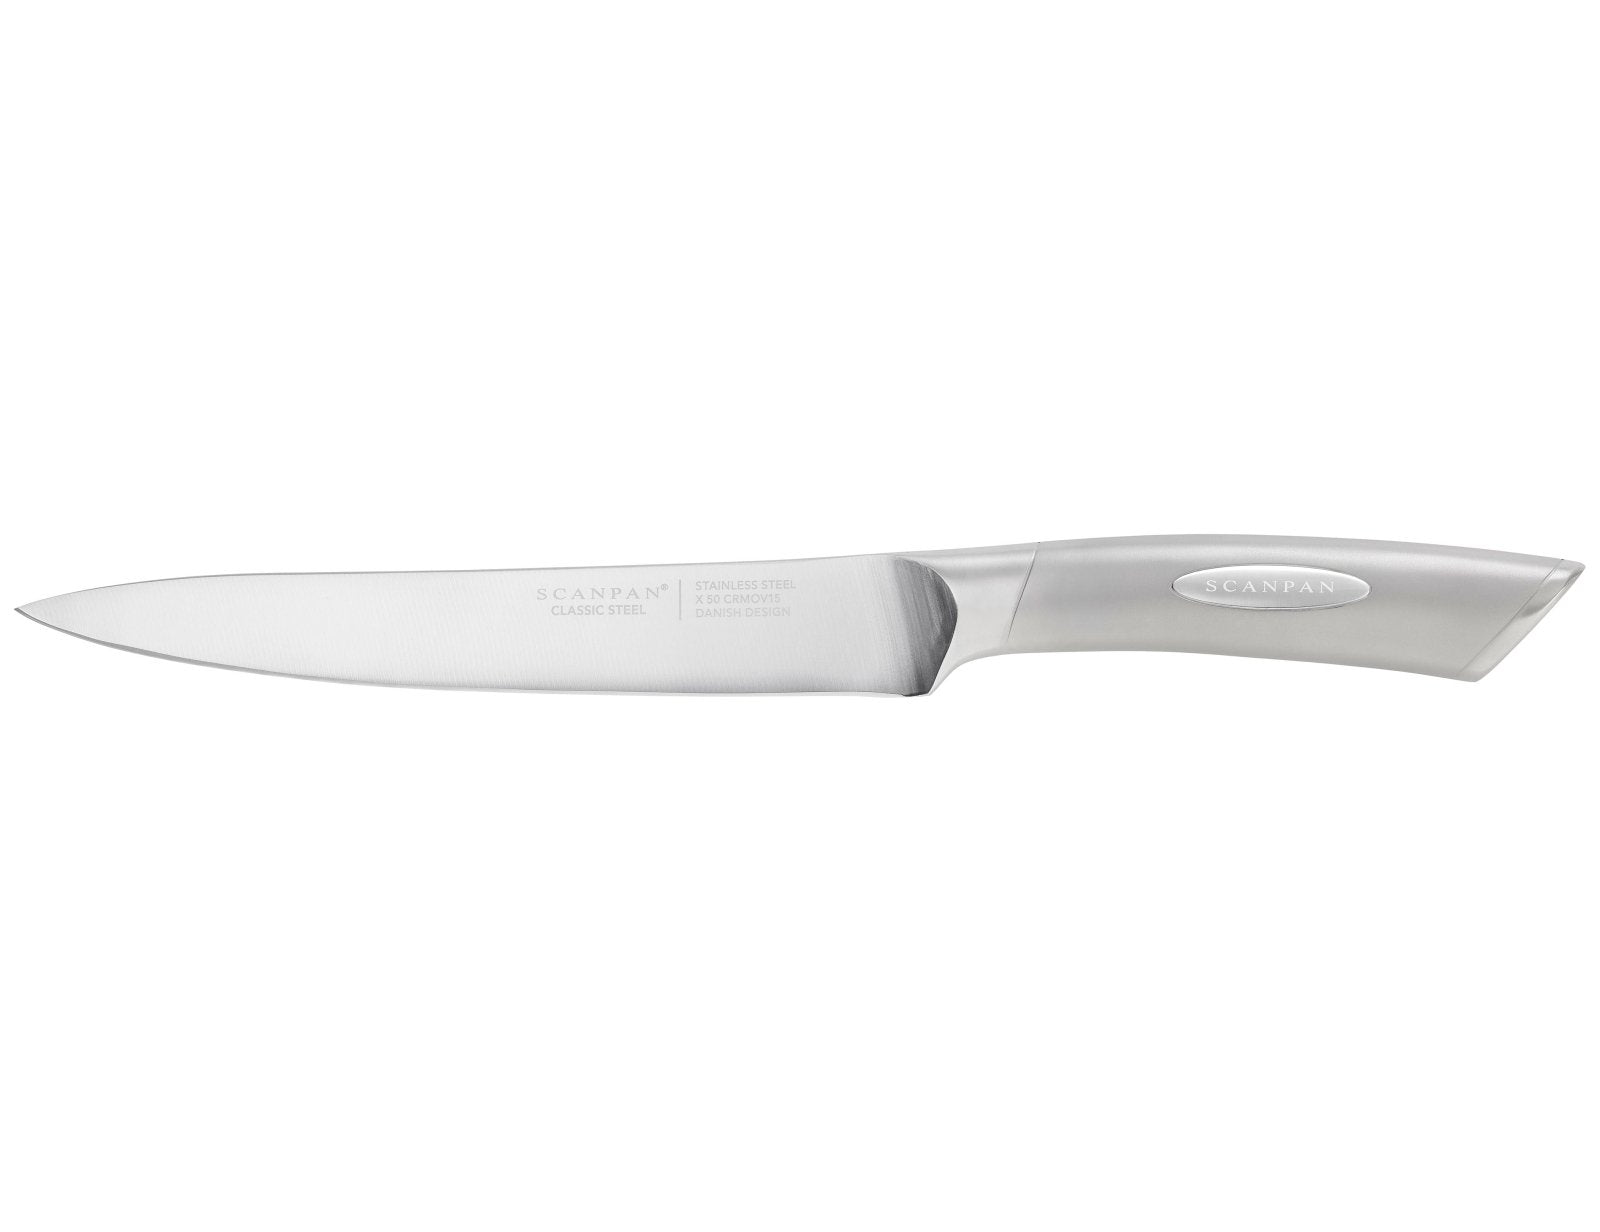 Scanpan Classic Steel 20cm Carving Knife - SP9001402000 - The Cotswold Knife Company